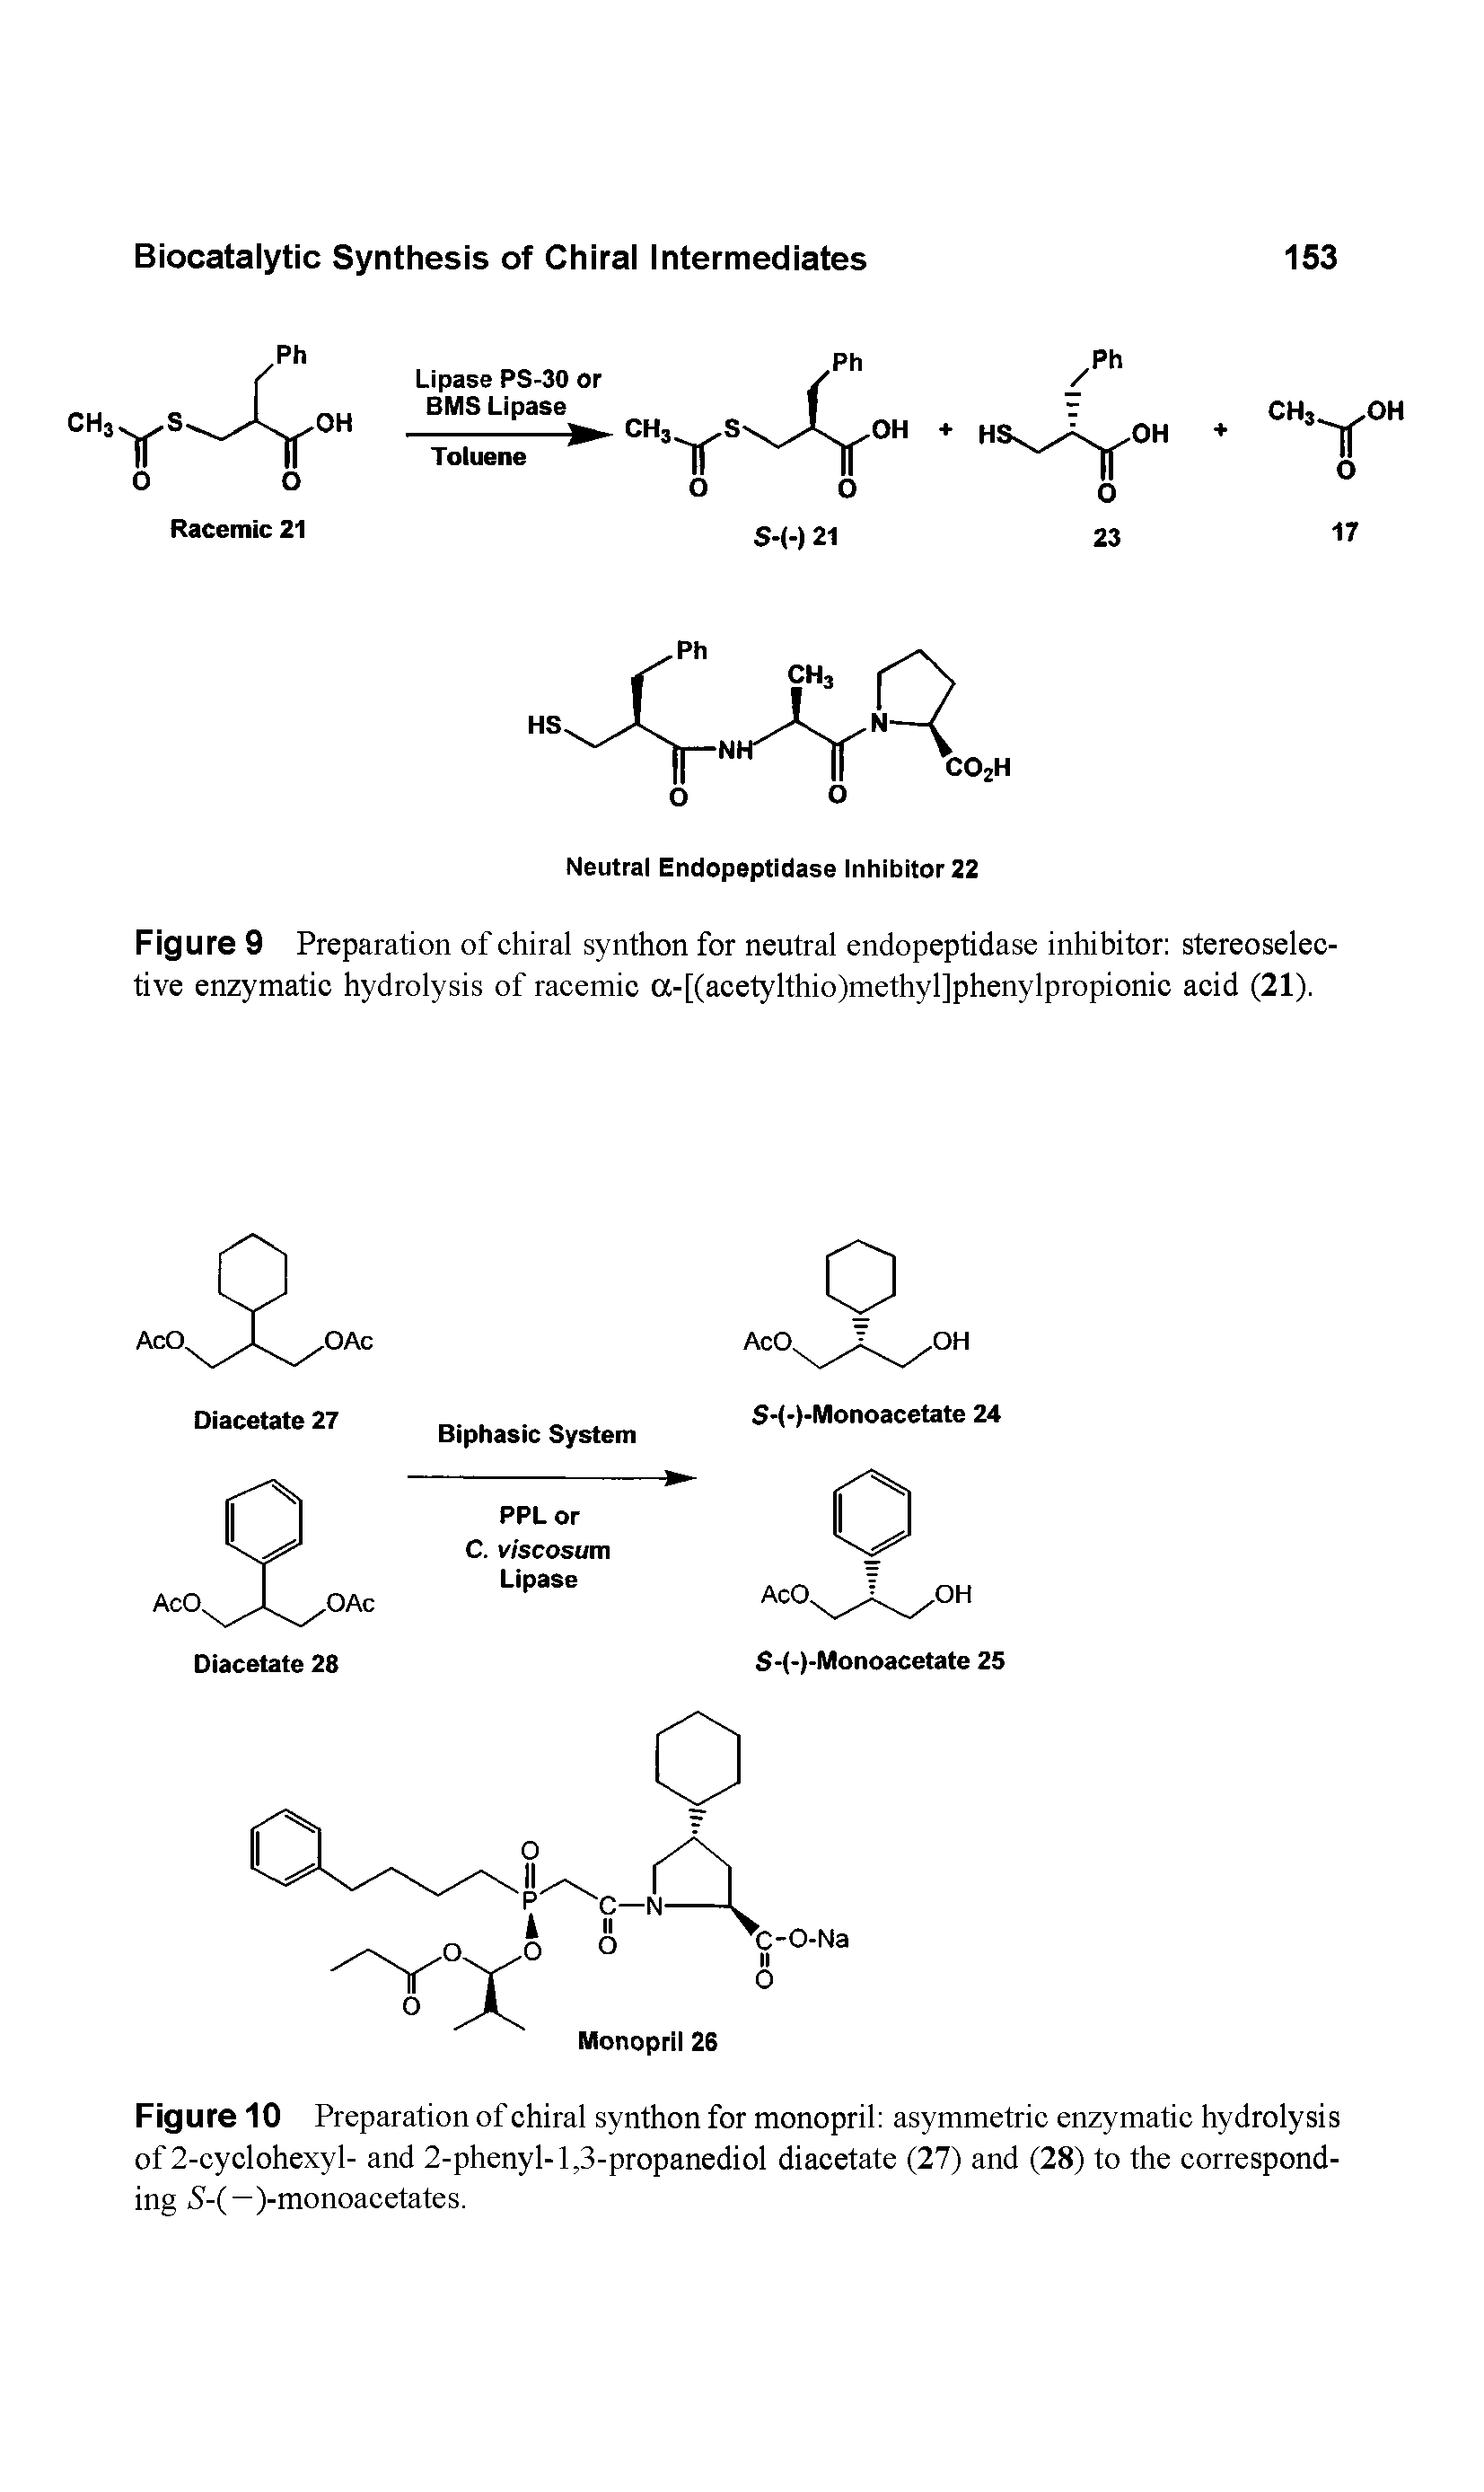 Figure 10 Preparation of chiral synthon for monopril asymmetric enzymatic hydrolysis of 2-cyclohexyl- and 2-phenyl-1,3-propanediol diacetate (27) and (28) to the corresponding S-(—)-monoacetates.